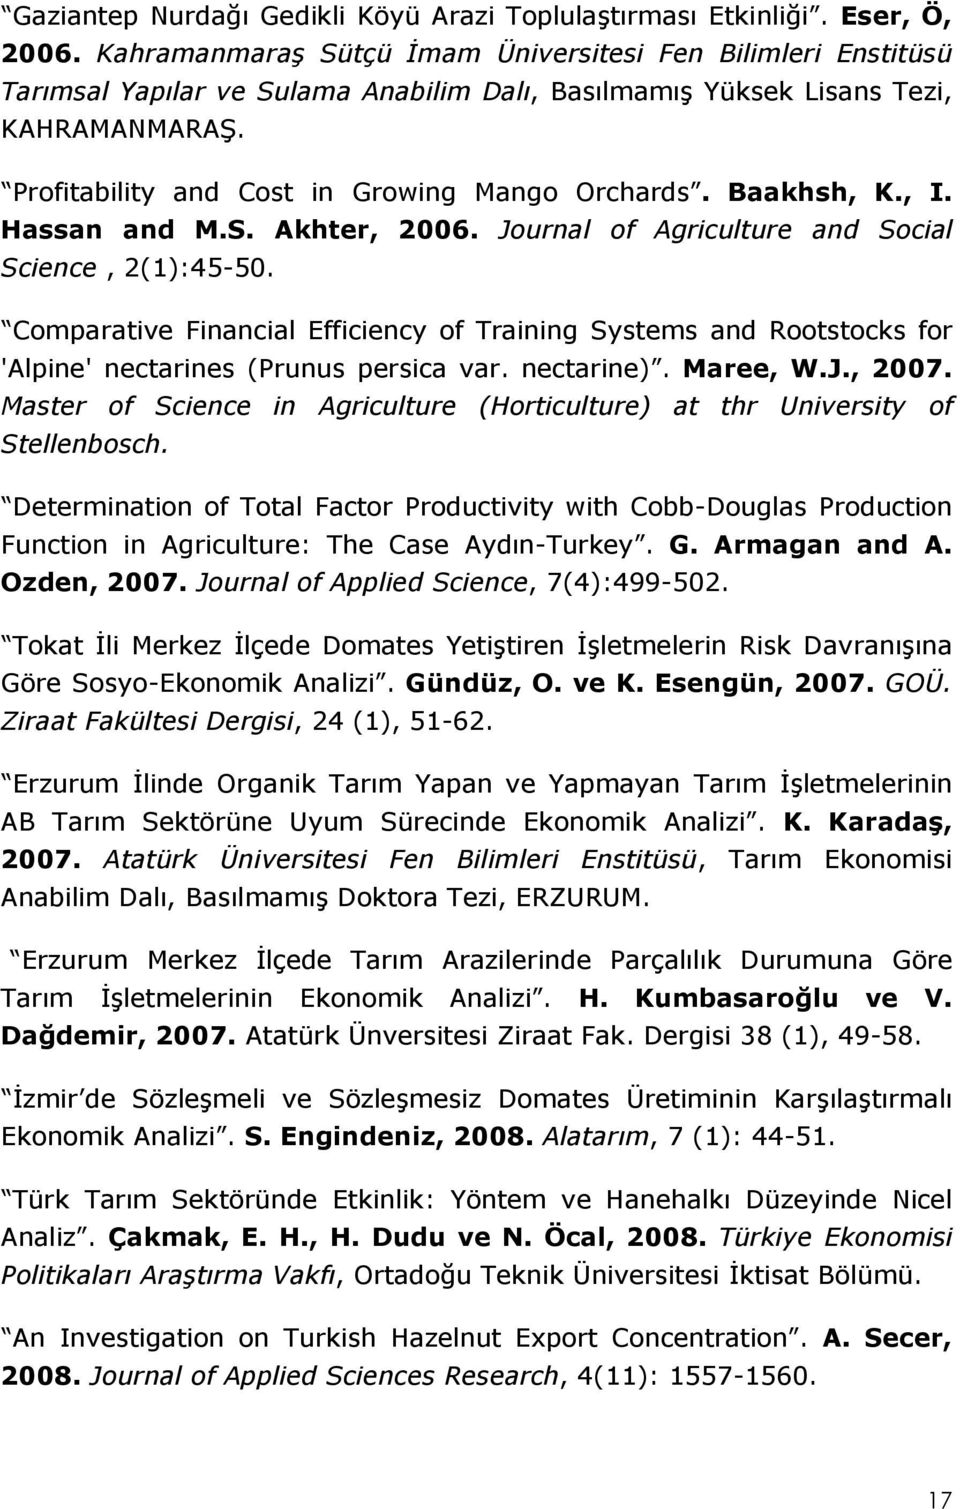 Baakhsh, K., I. Hassan and M.S. Akhter, 2006. Journal of Agriculture and Social Science, 2(1):45-50.